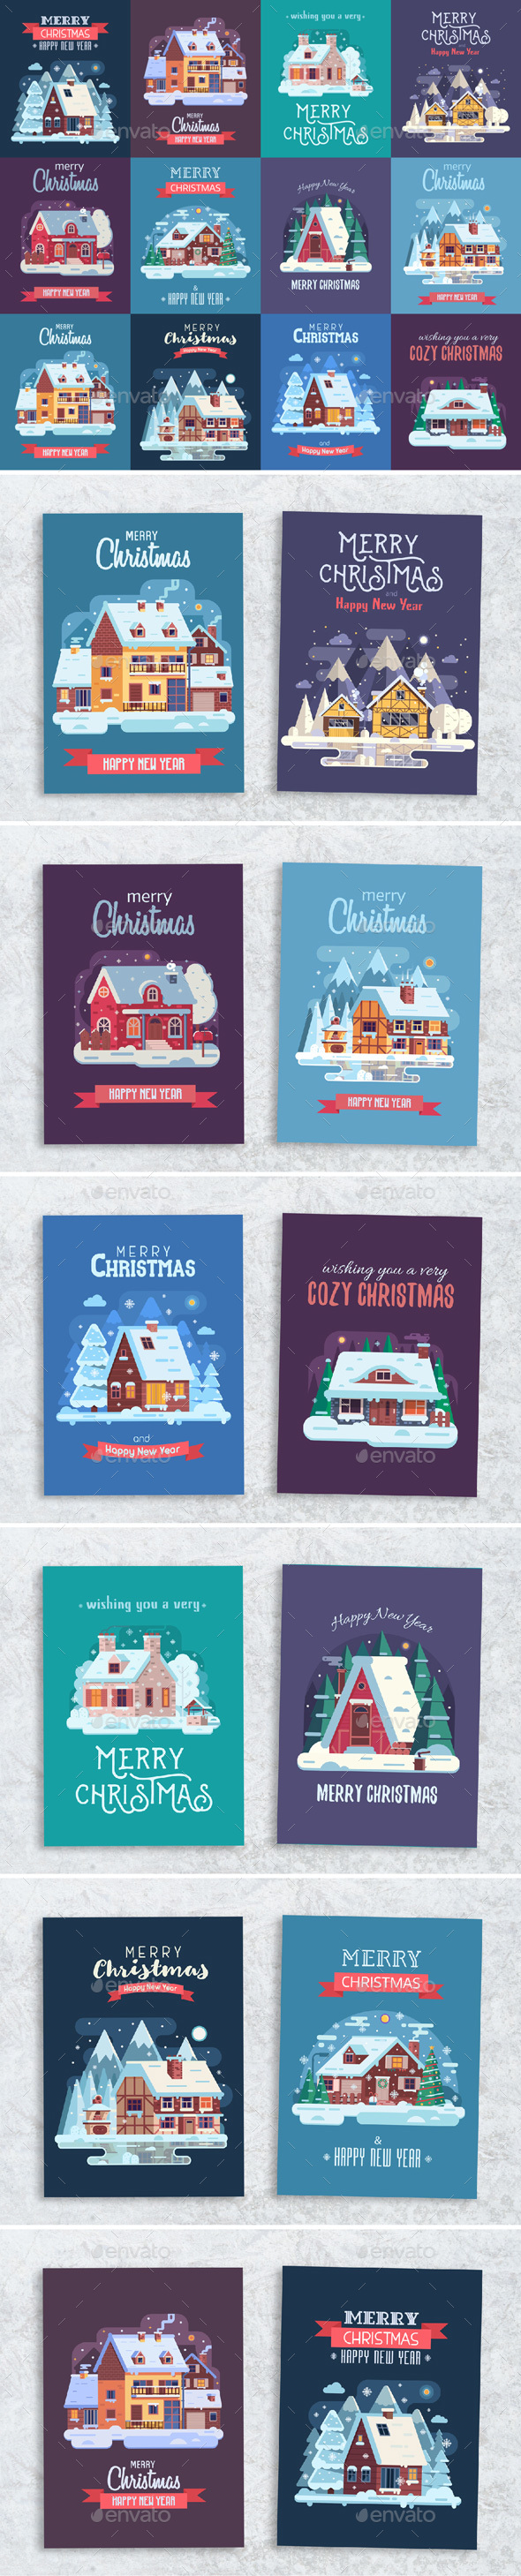 GraphicRiver Rural Winter Houses Christmas Cards 21021434